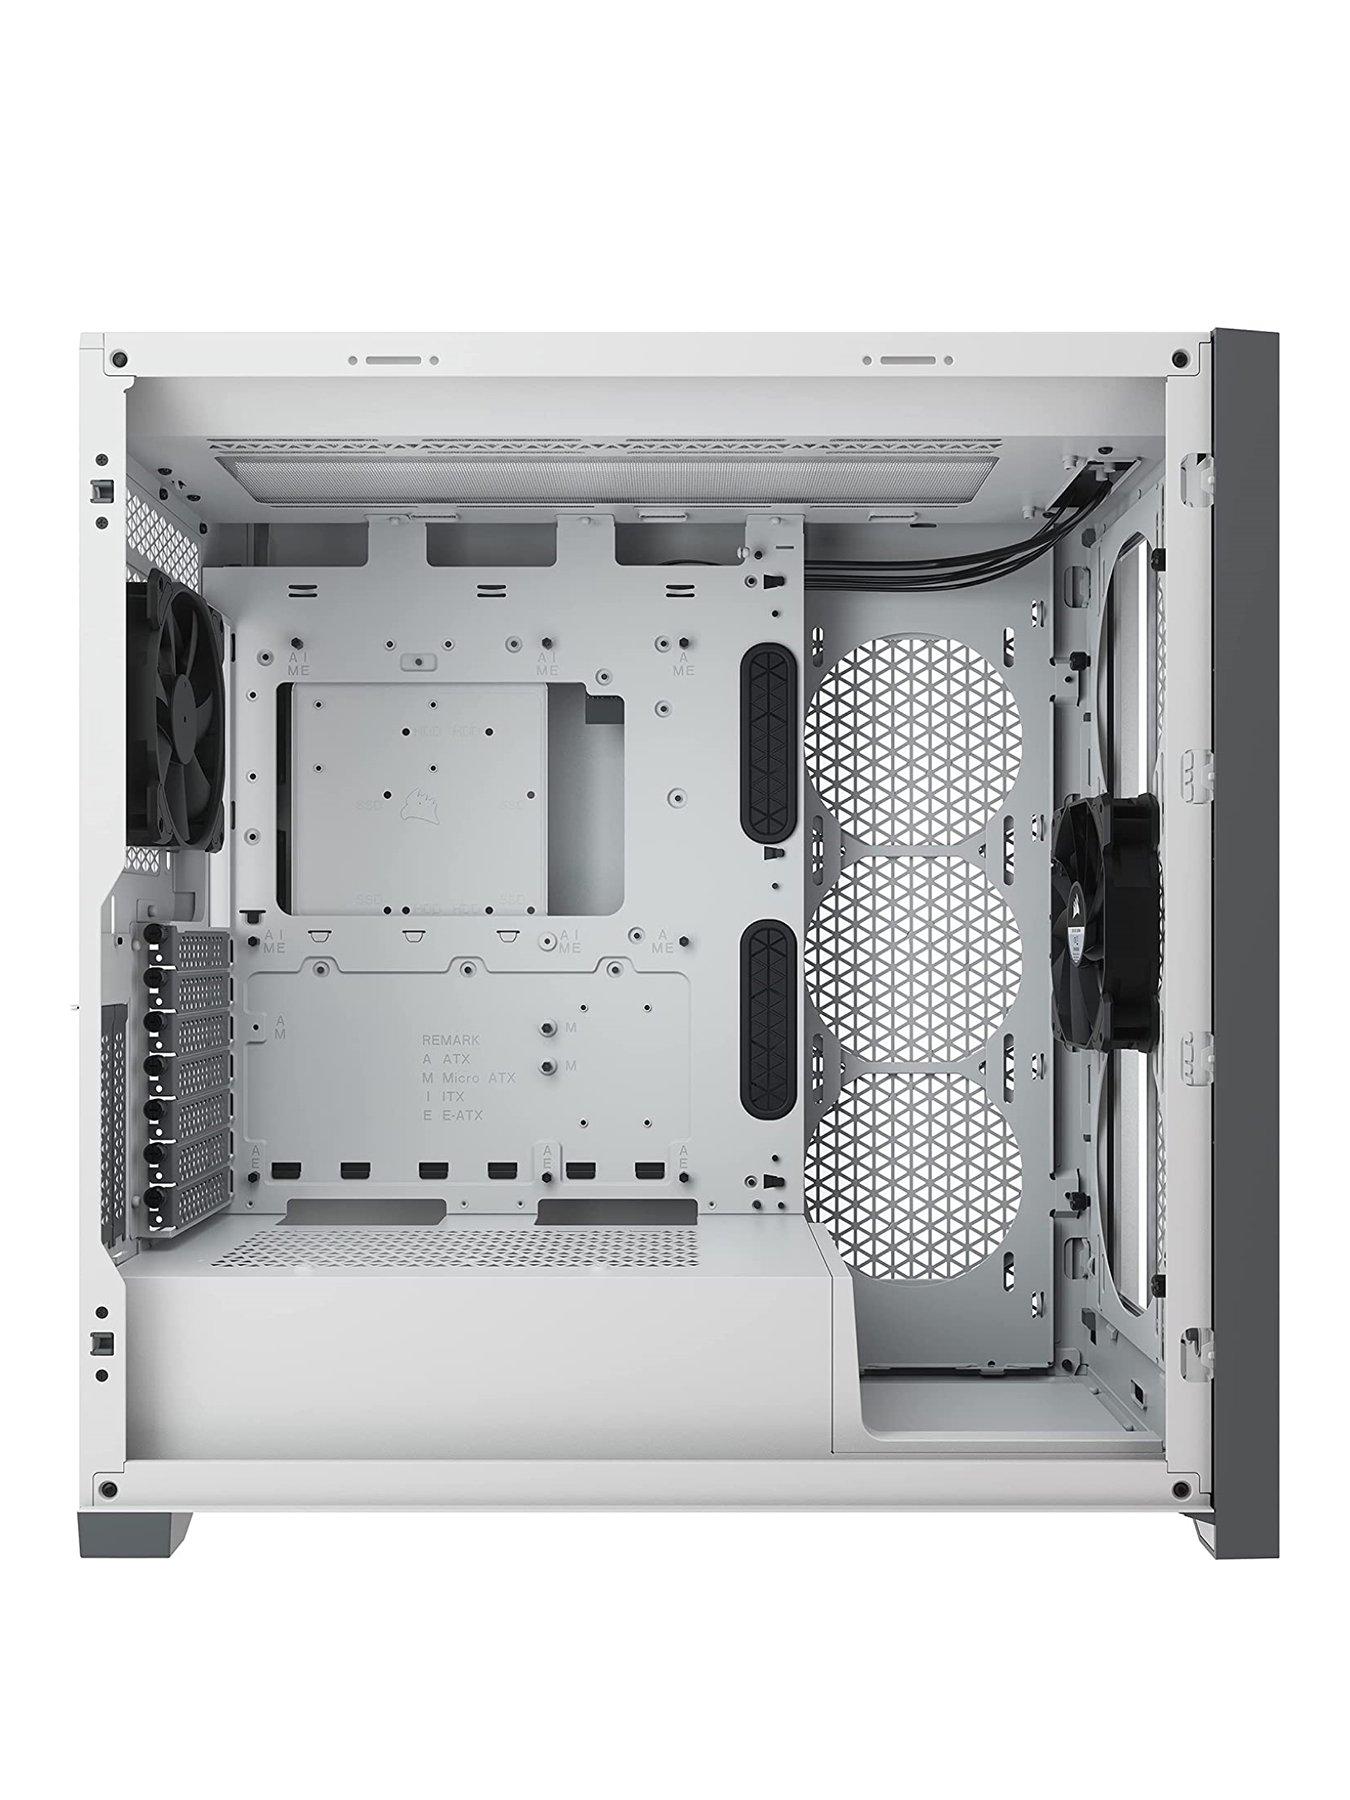 Corsair 5000D Airflow Tempered Glass White Mid-Tower ATX PC Case